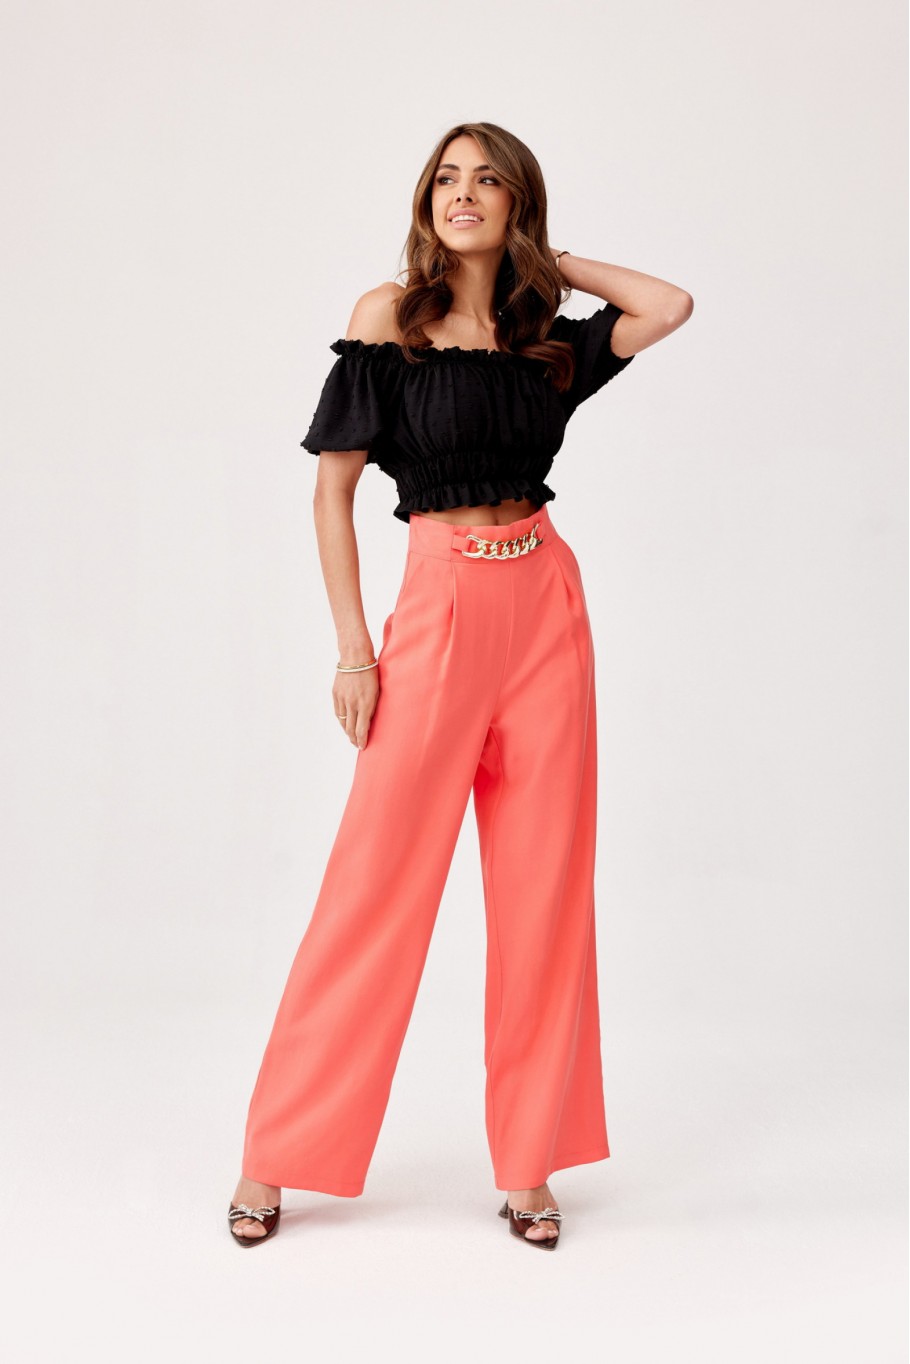 Audrey - wide women's trousers with a decorative chain POM